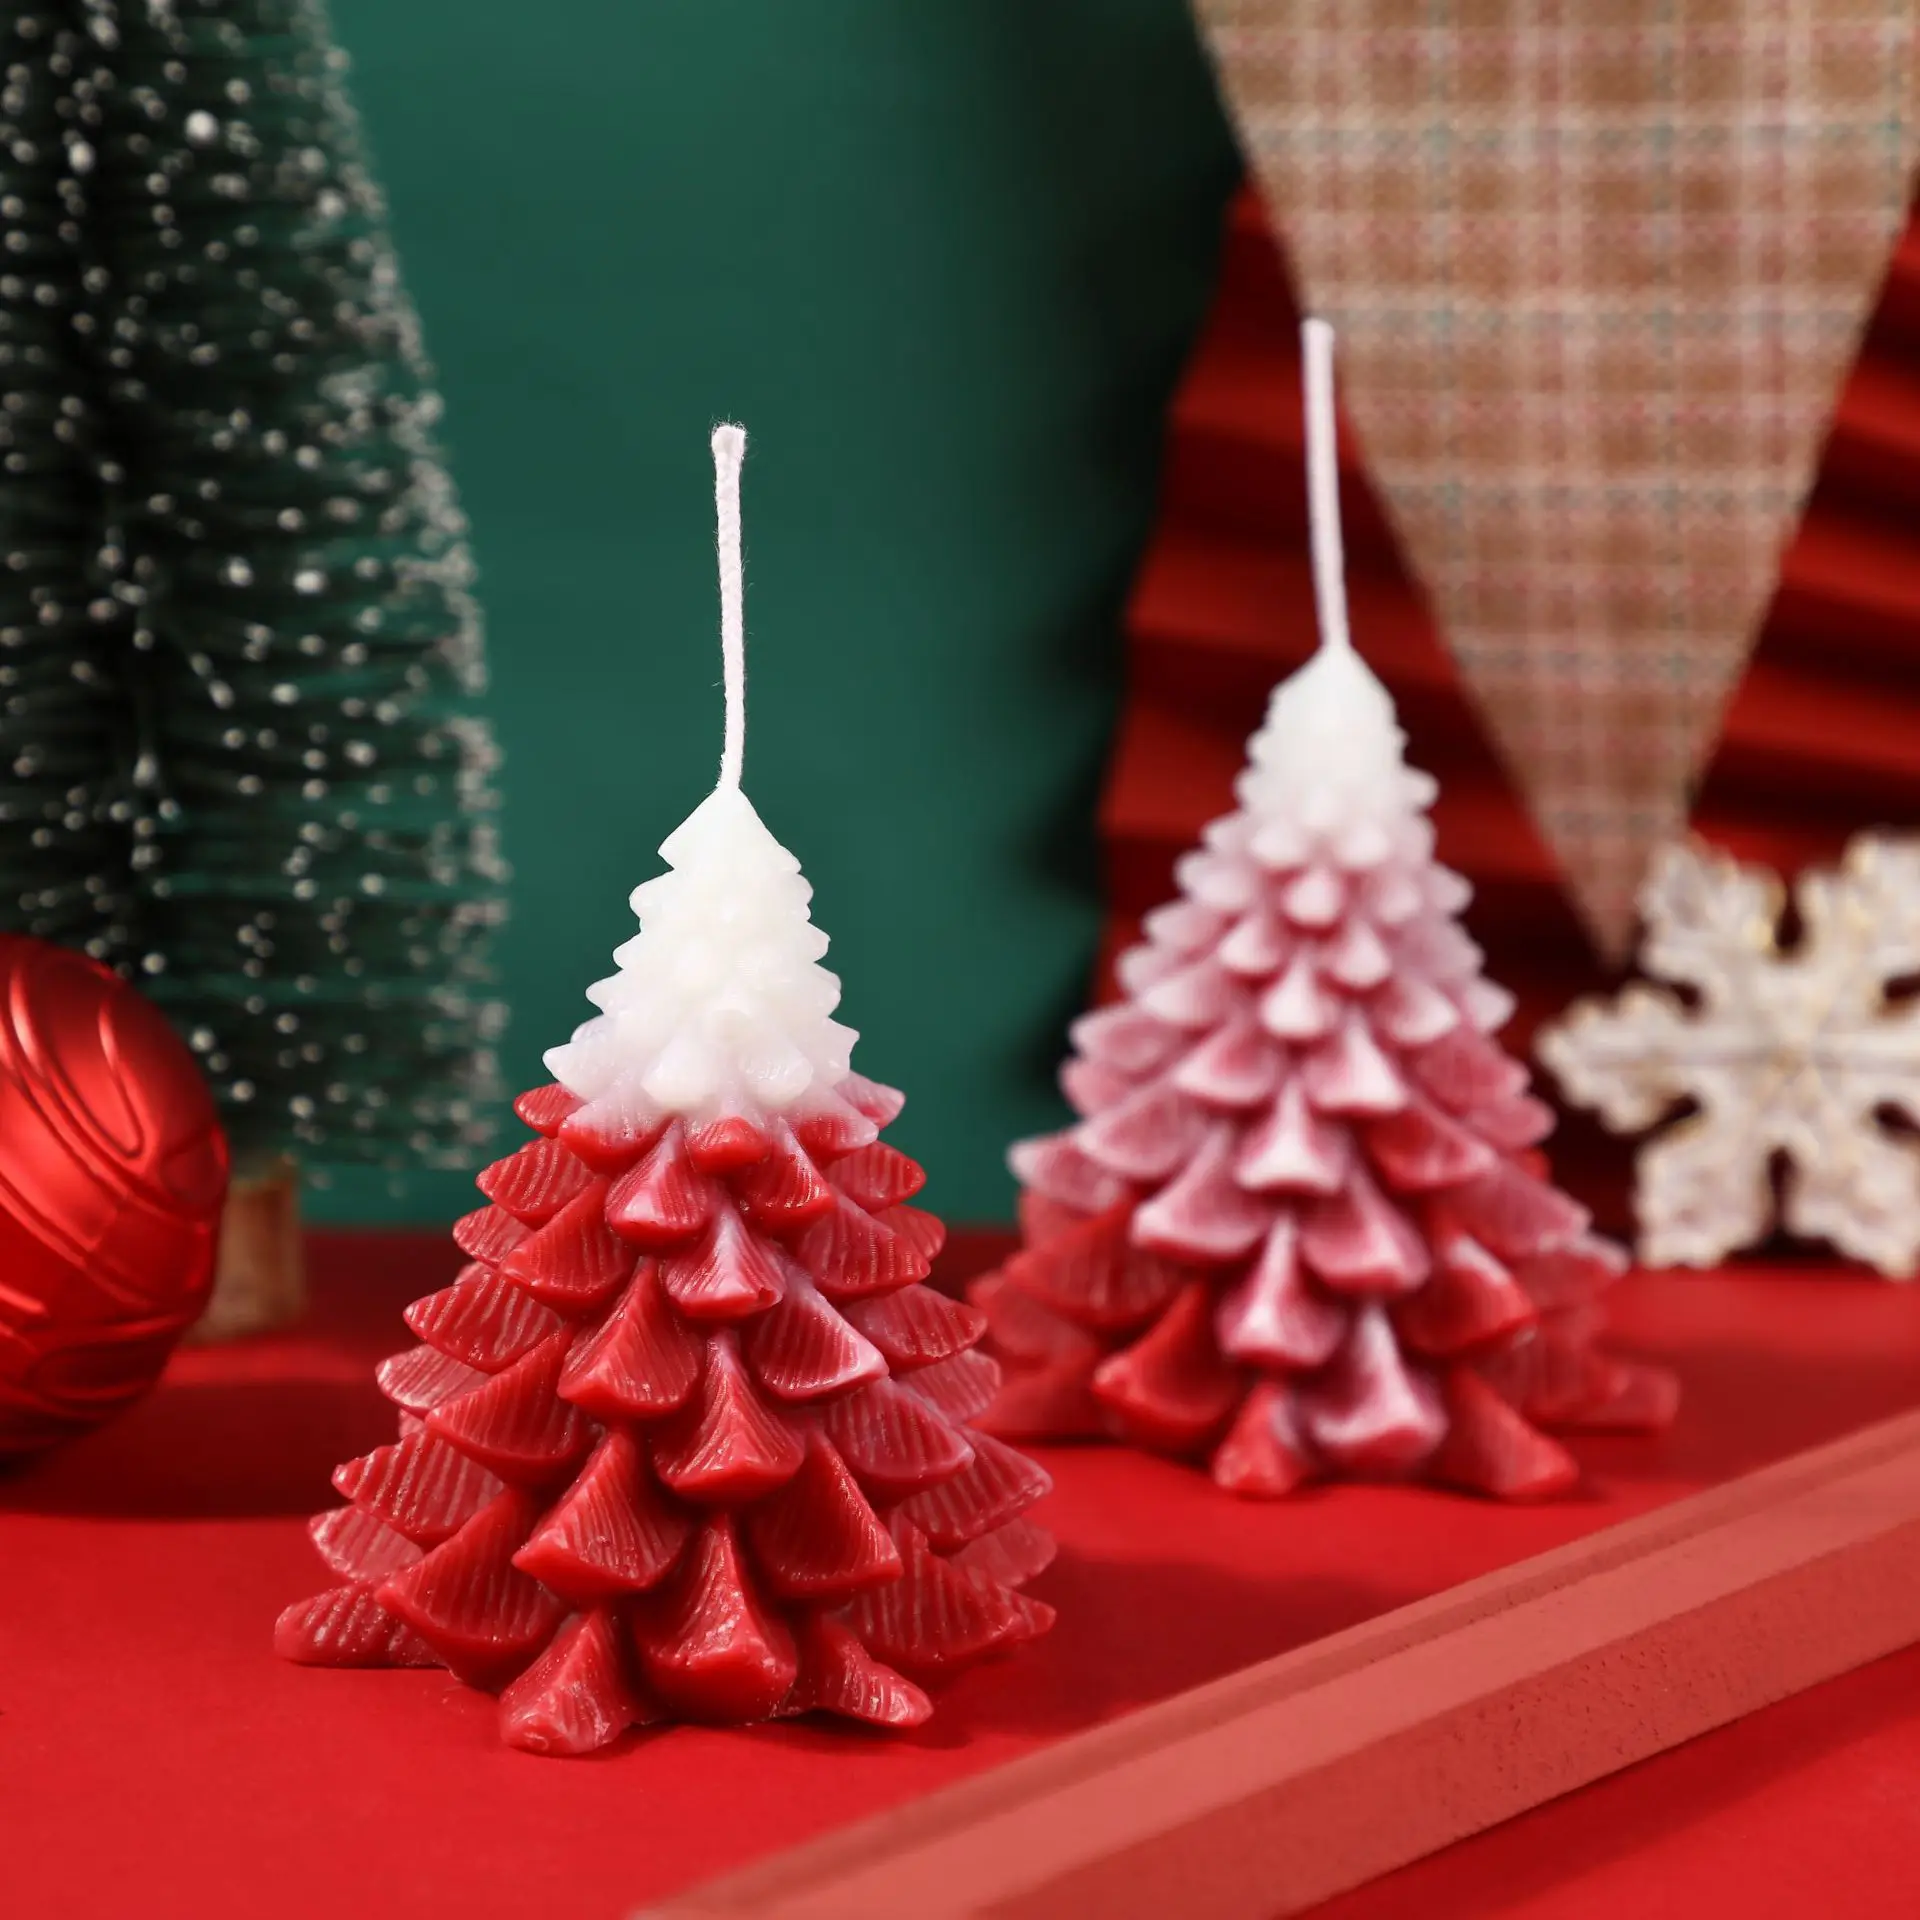 https://ae01.alicdn.com/kf/Se80708e807544e49a2a6b1991f0888b0y/3D-Large-Christmas-Pine-Tree-Silicone-Mold-DIY-Scented-Soap-Soy-Wax-Aroma-Candle-Making-Home.jpg